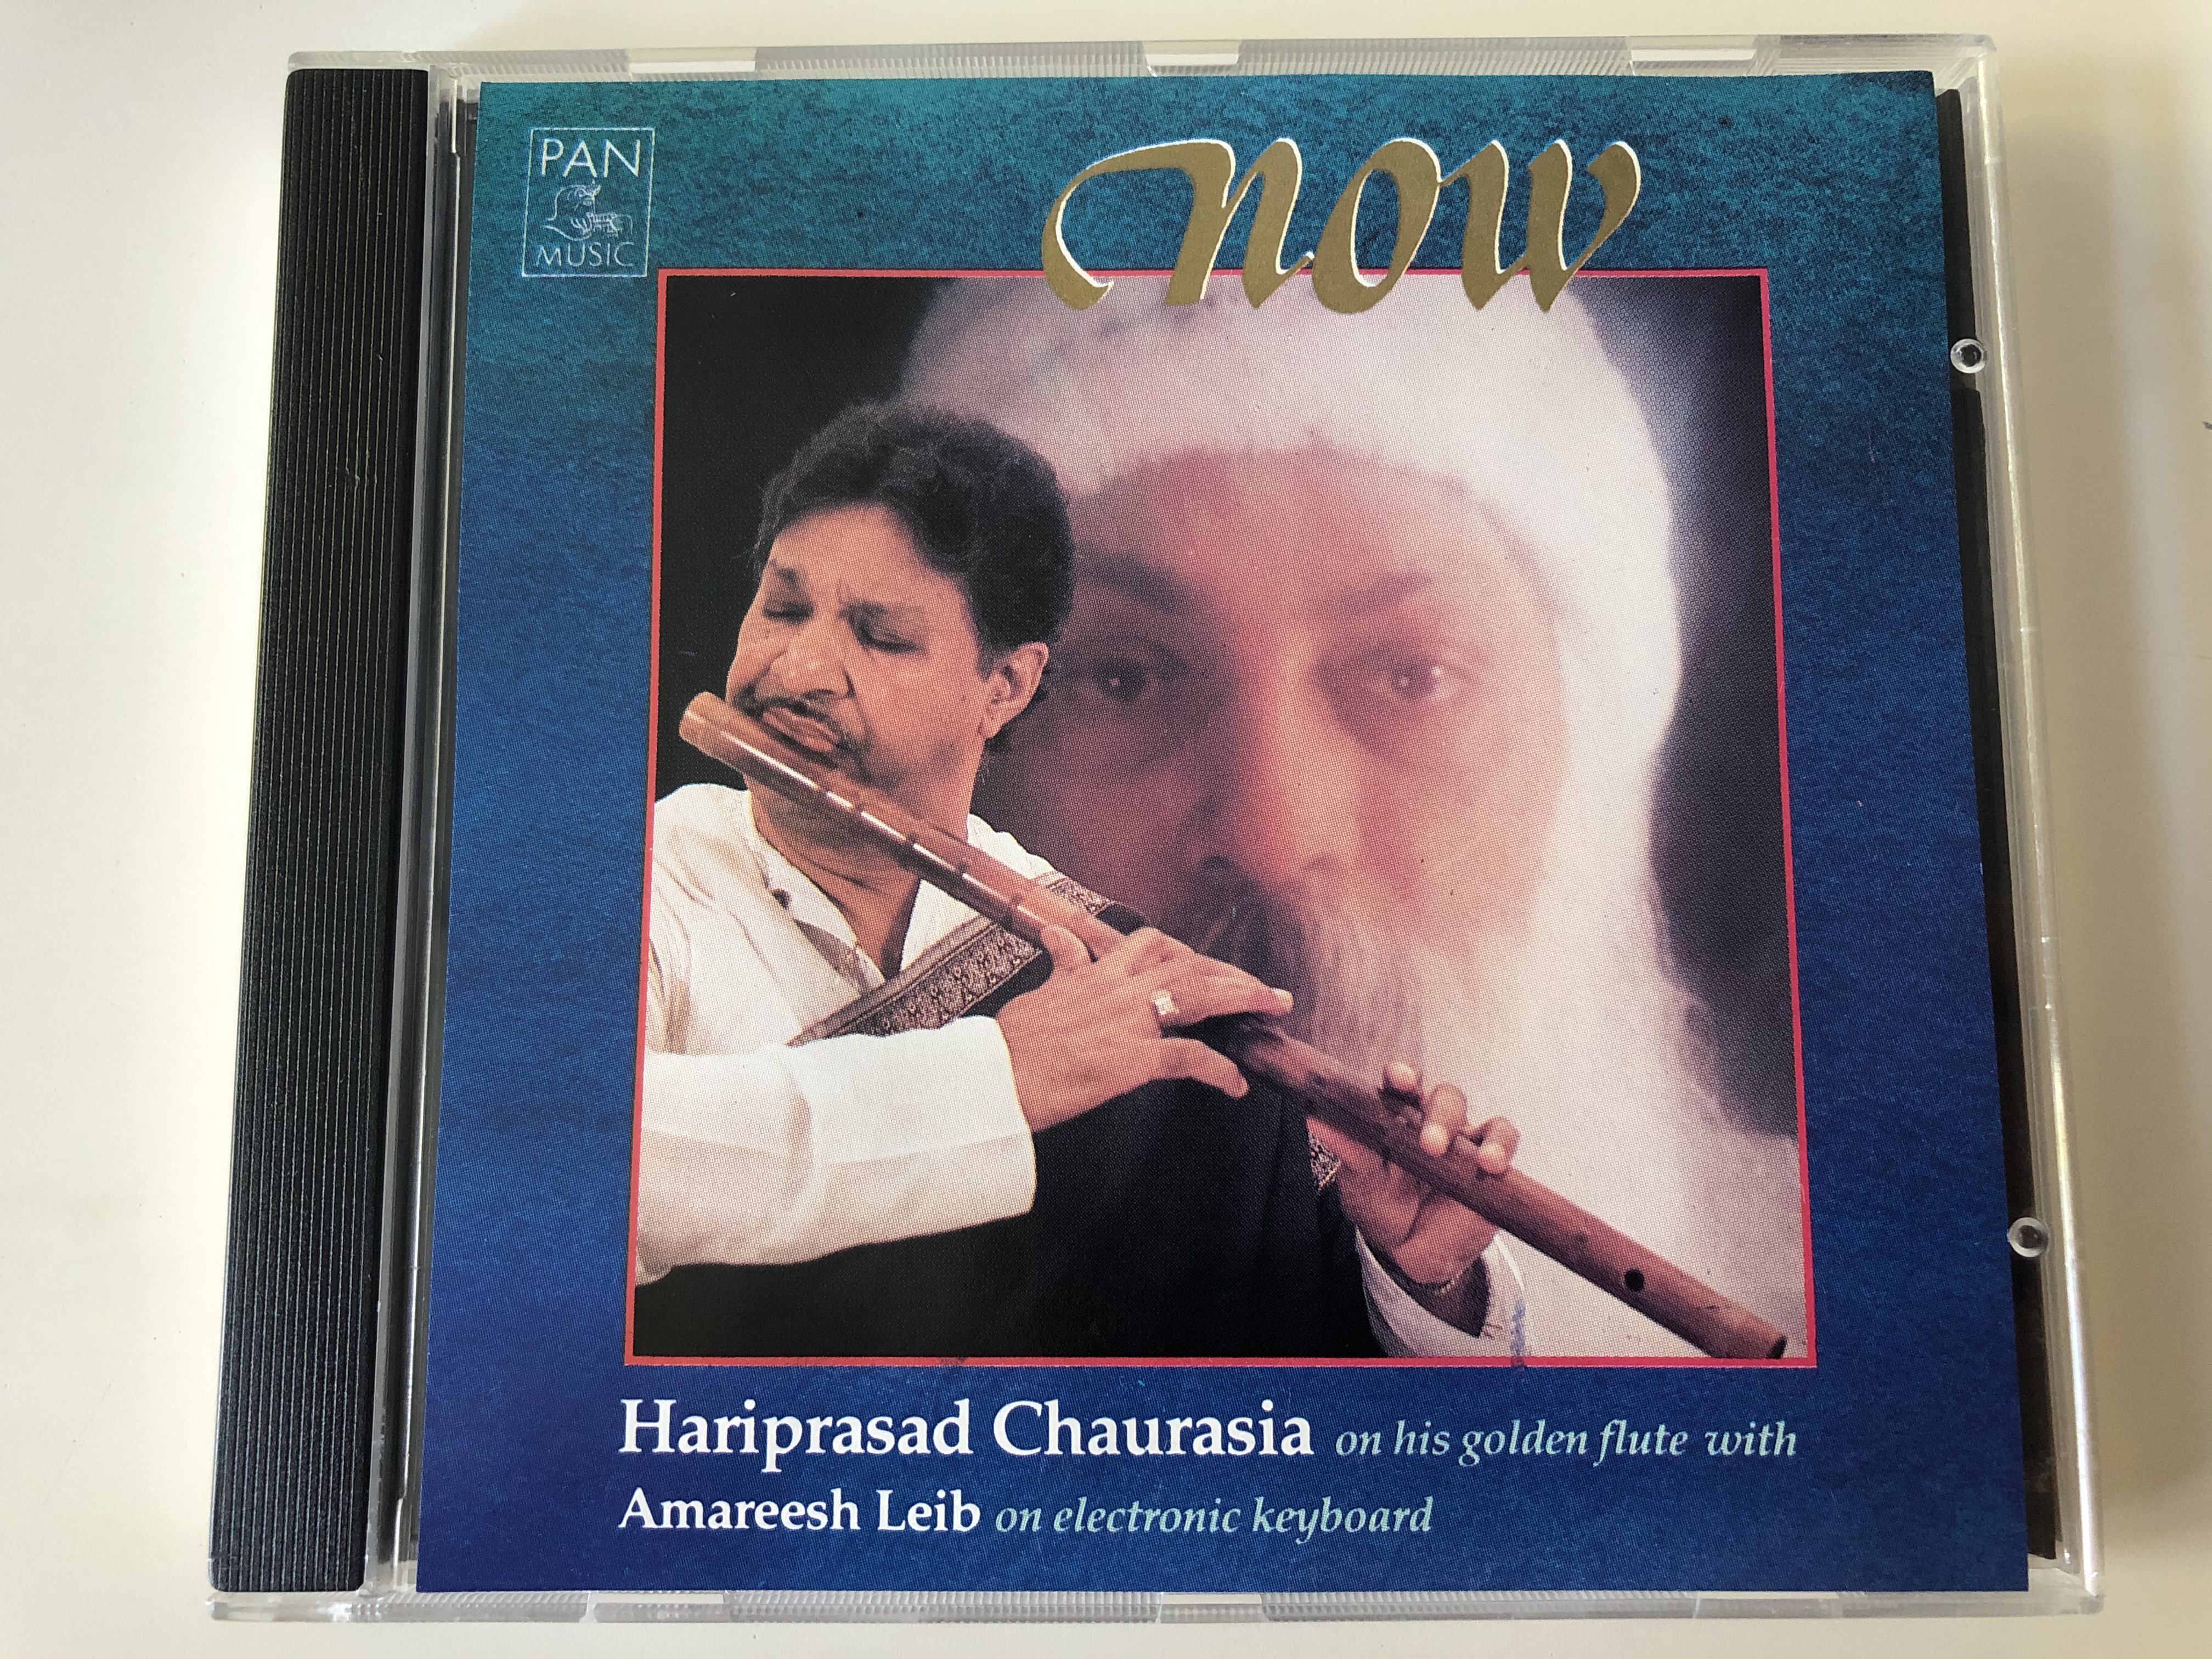 now-hariprasad-chaurasia-on-his-golden-flute-with-amareesh-leib-on-electronic-keyboard-pan-music-audio-cd-1994-cd-014-1-.jpg